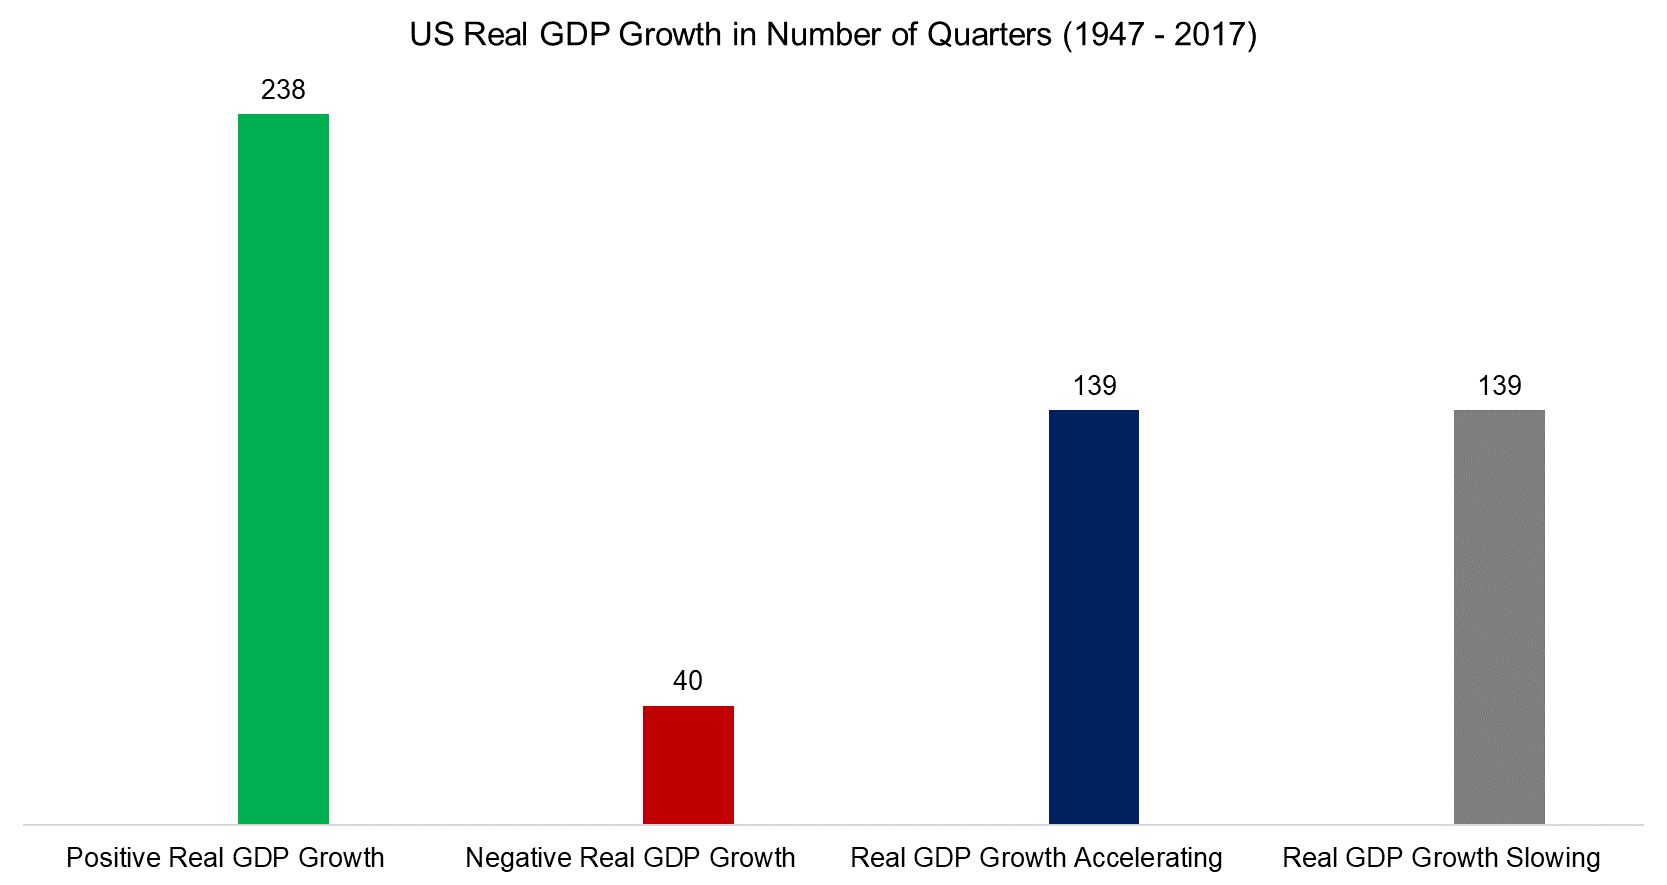 US Real GDP Growth in Number of Quarters (1947 - 2017)